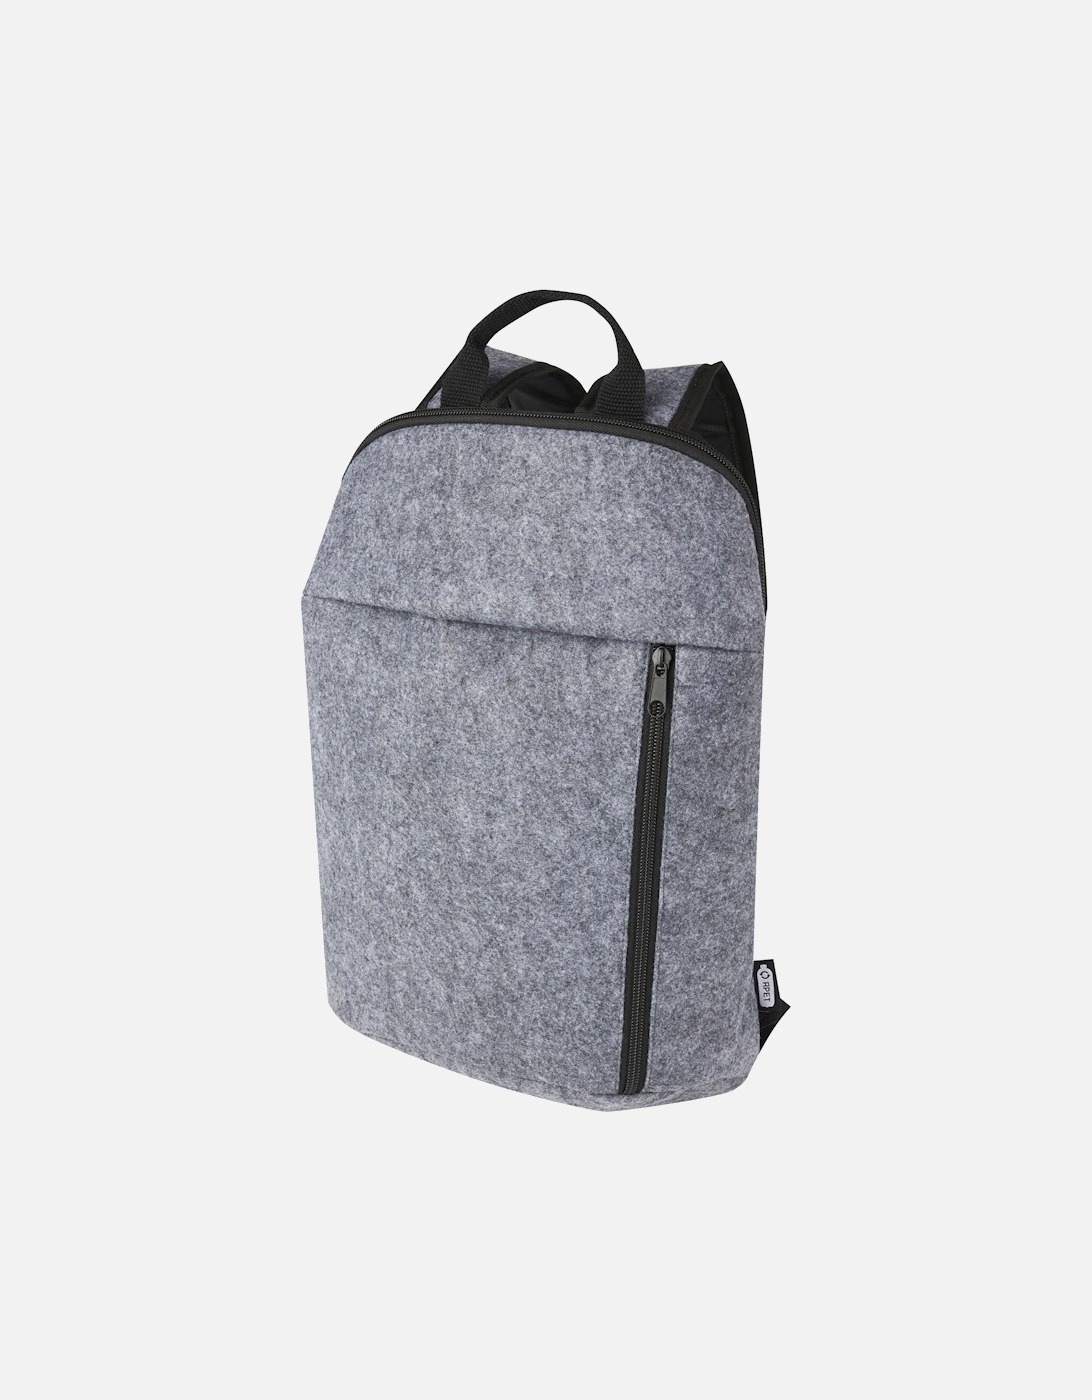 Felta 7L Recycled Polyester Cooler Bag